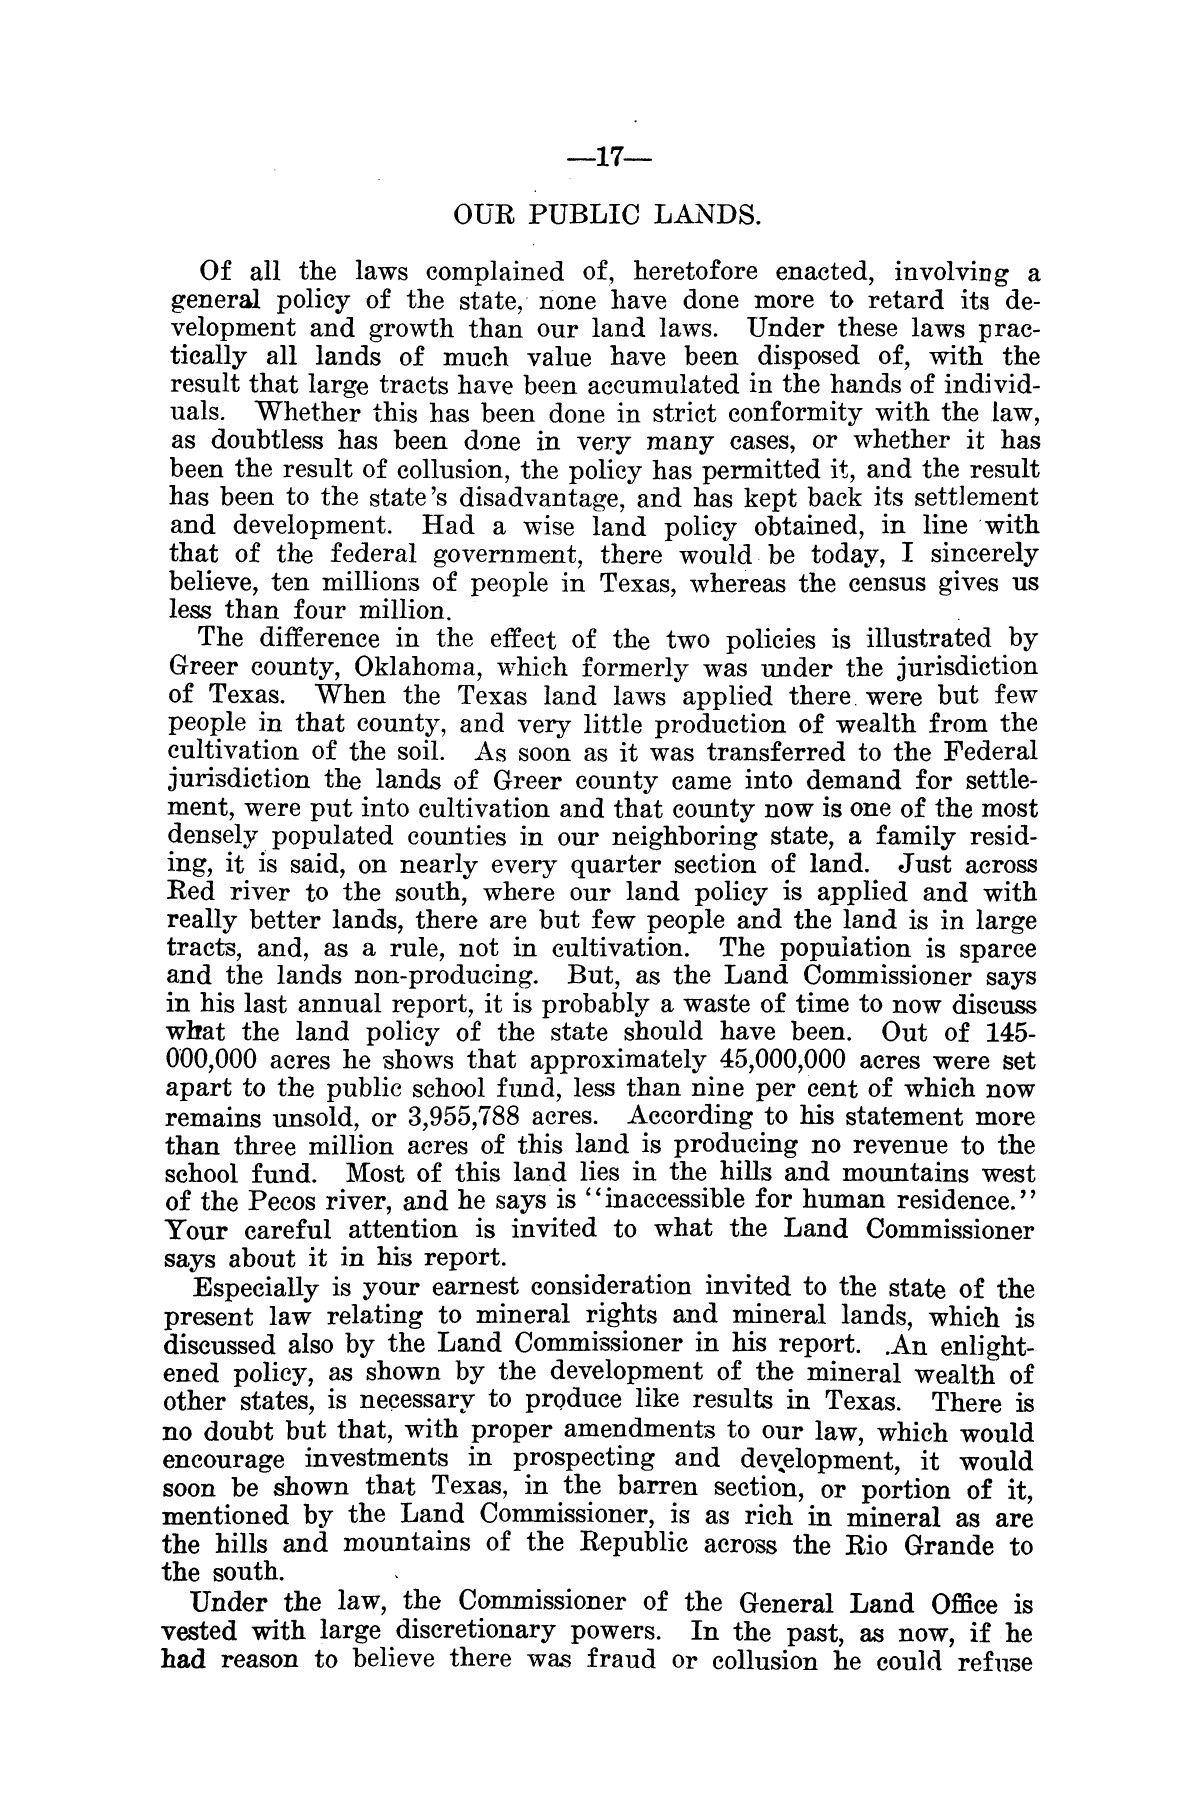 Message of Governor O. B. Colquitt to the thirty-second legislature of Texas.
                                                
                                                    [Sequence #]: 17 of 24
                                                